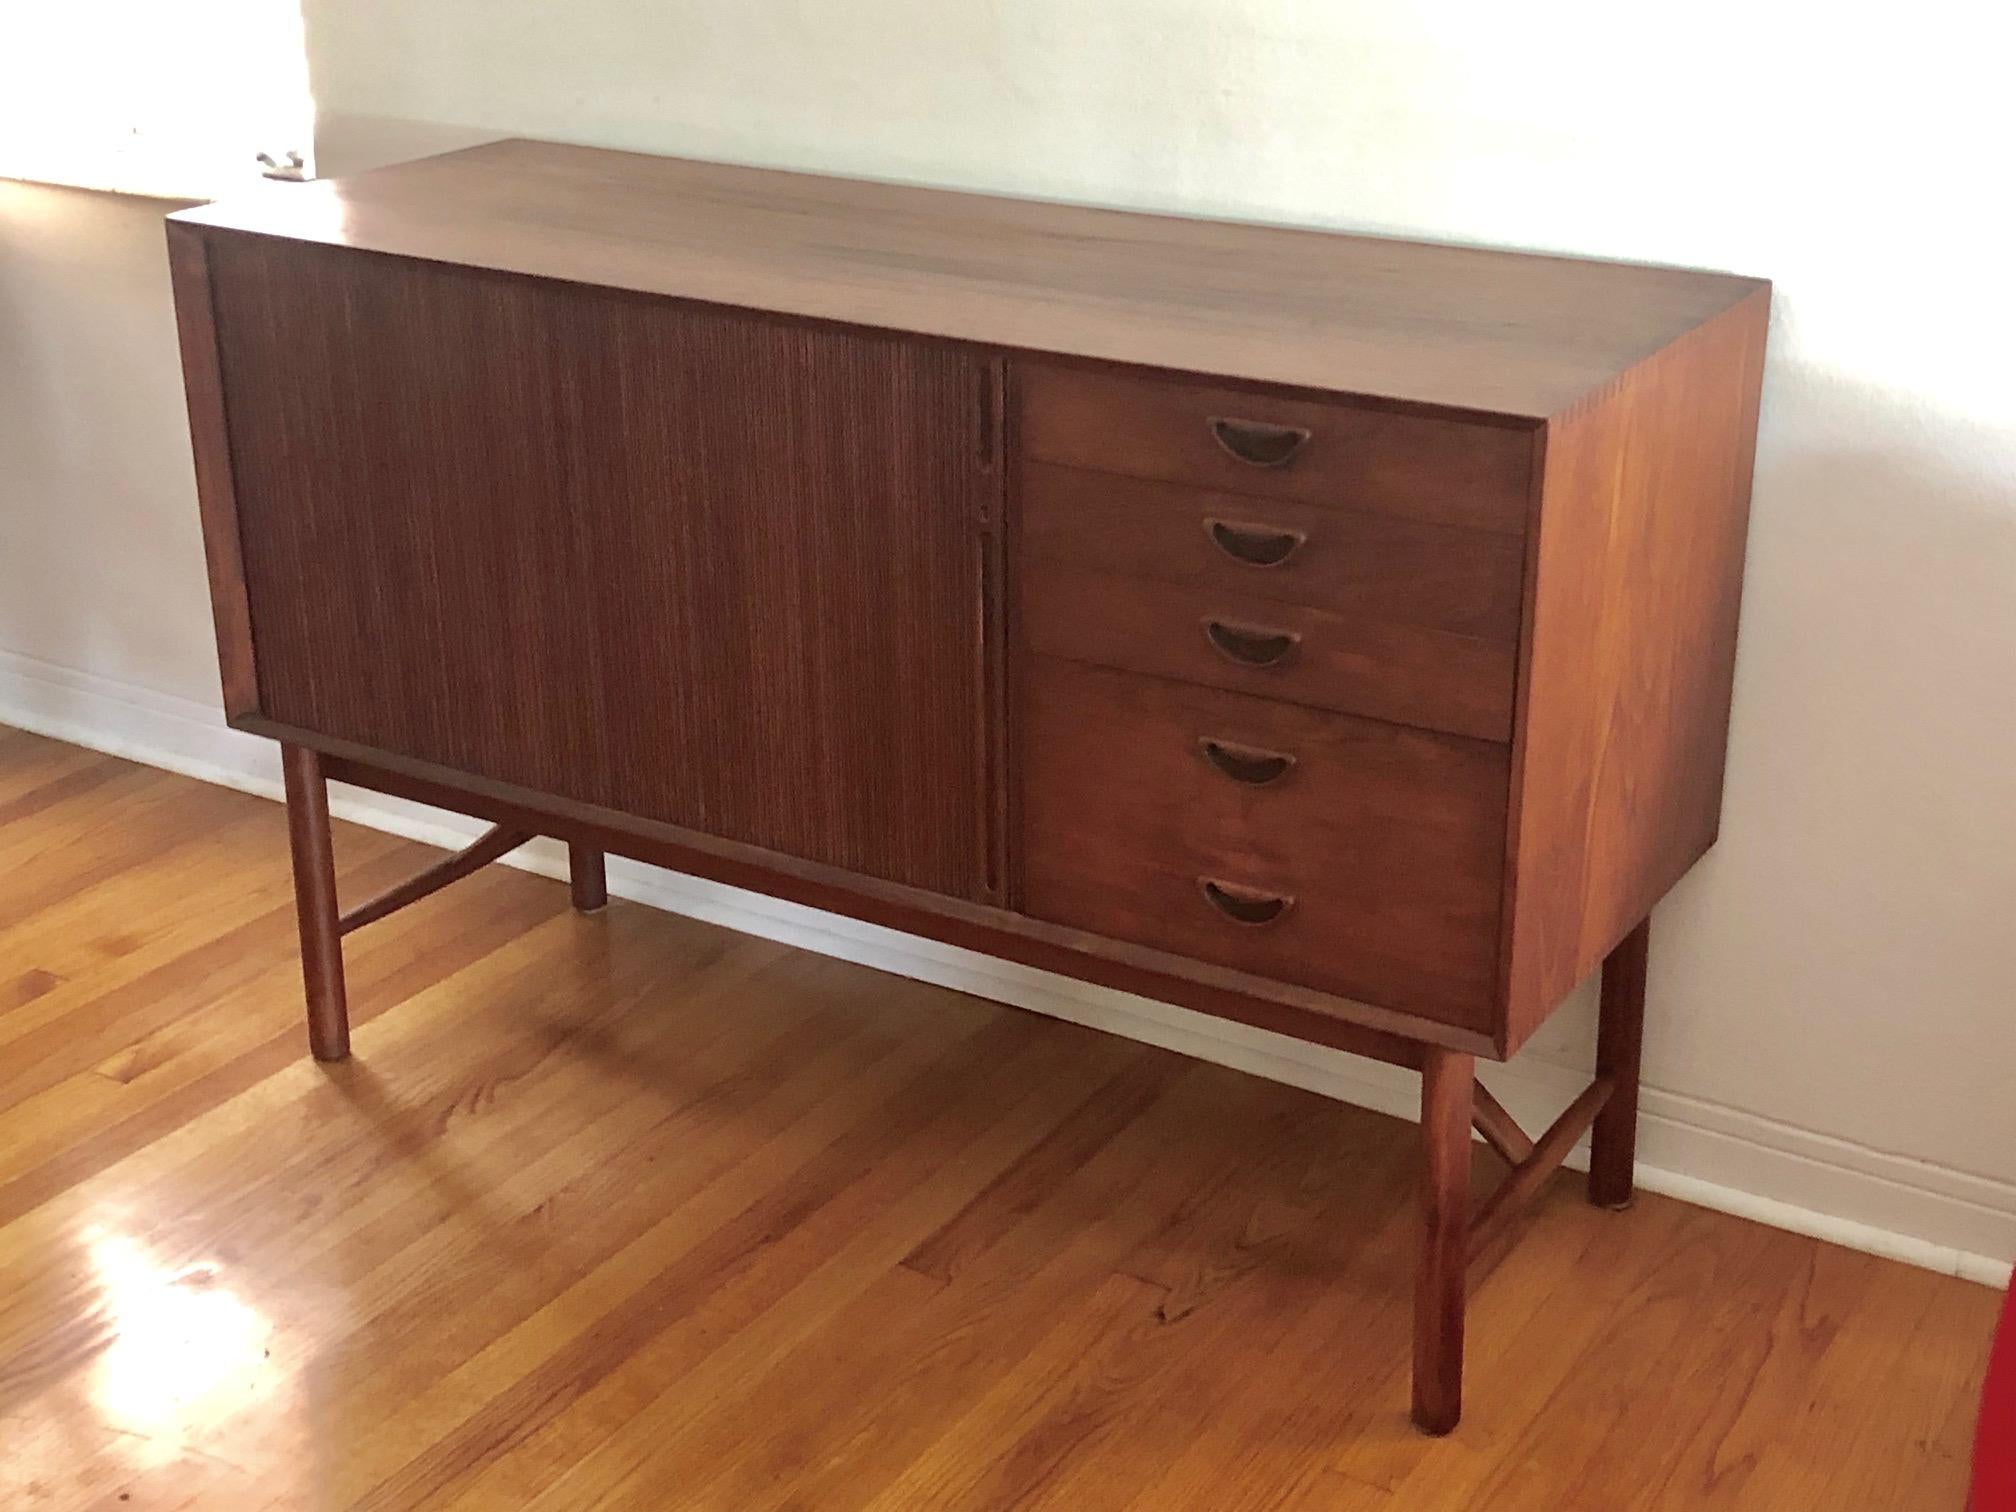 A classic credenza by Peter Hvidt & Orla Moregaard Nielsen for Soborg Mobler, Denmark, circa 1960s.
Original finish and nice rich patina. Tambour door reveals storage and pull out drawers make this a practical and stylish piece. Optional drop down